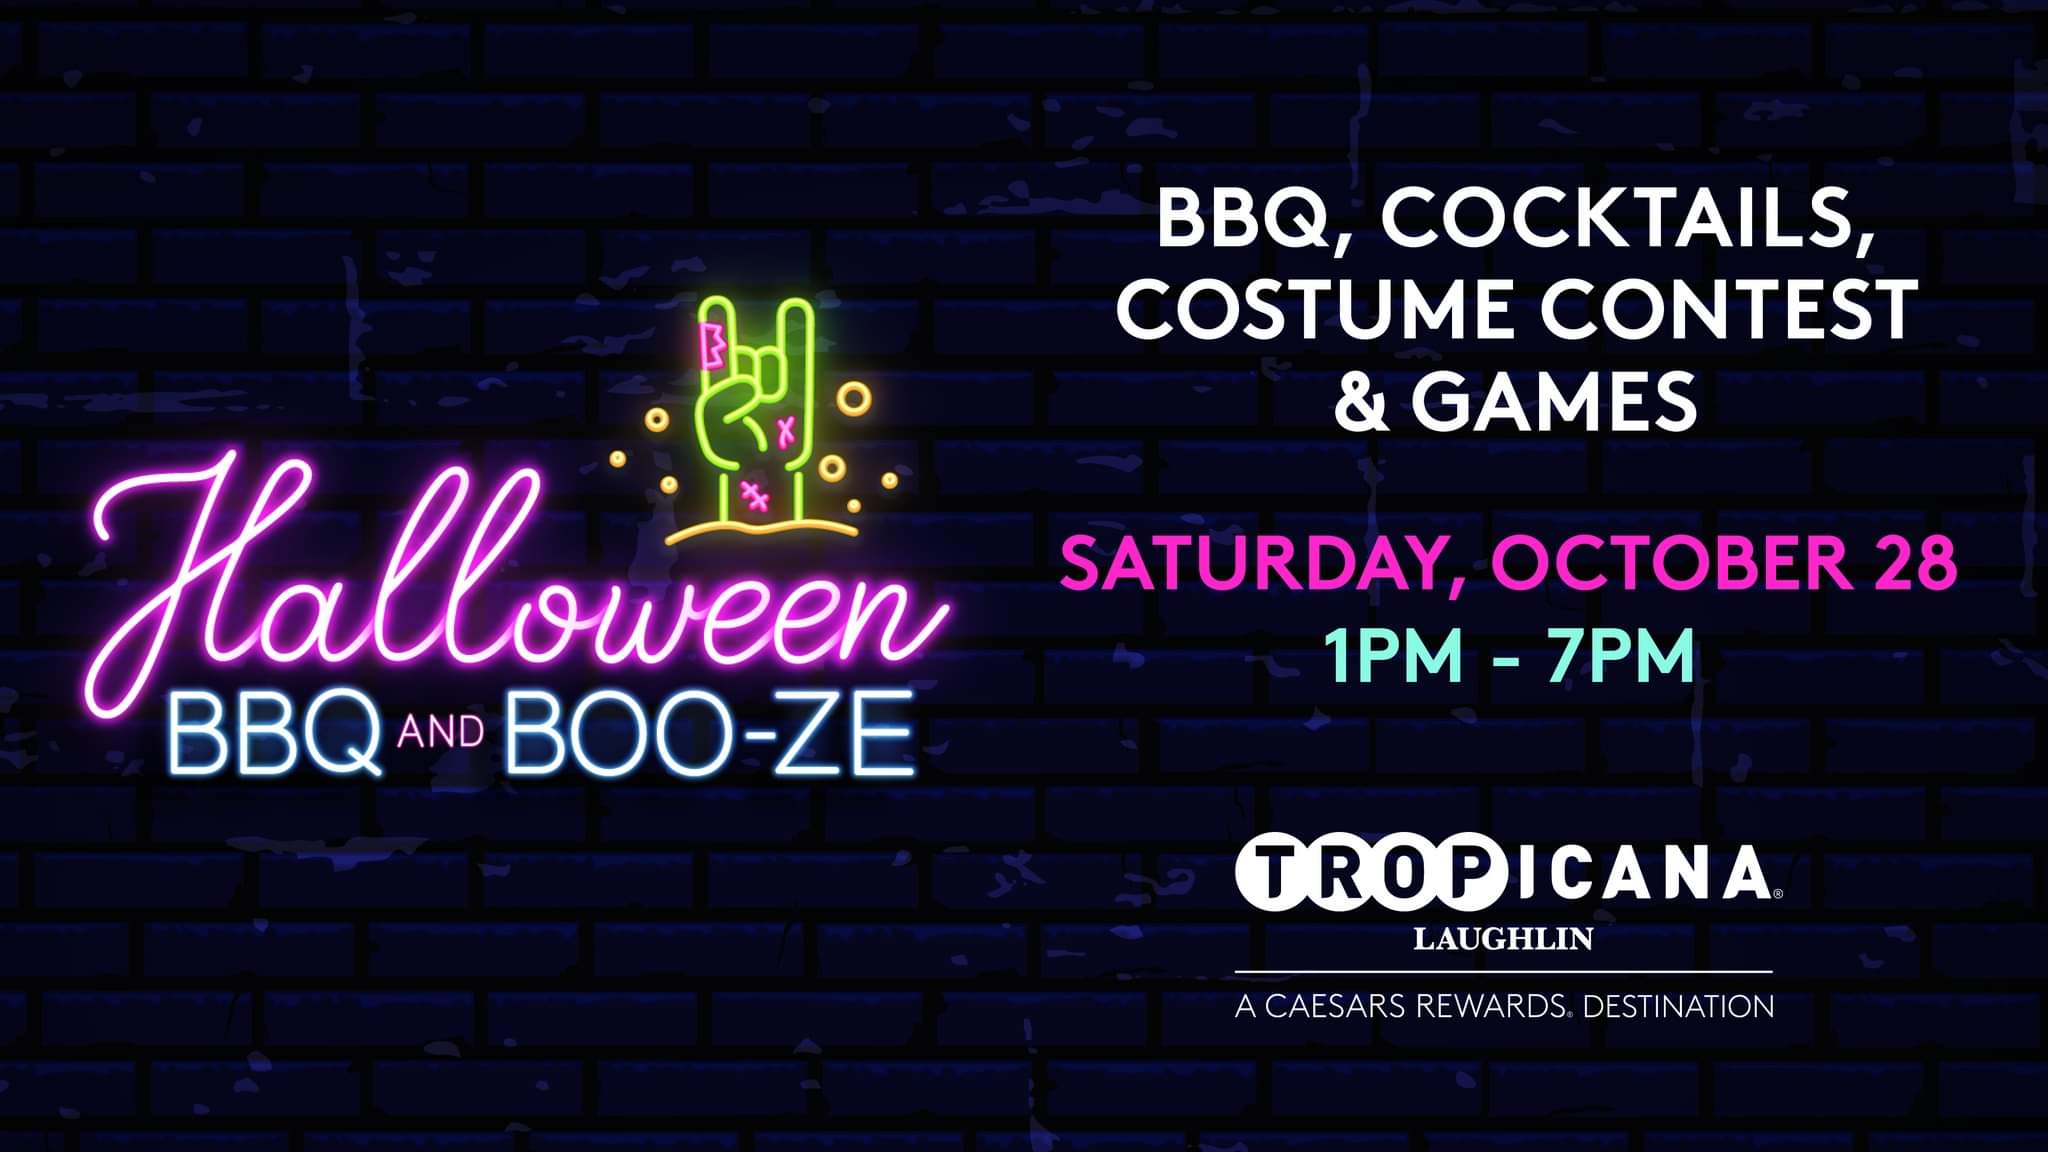 Tropicana Laughlin’s 1st Annual Halloween BBQ and BOO-ZE Event